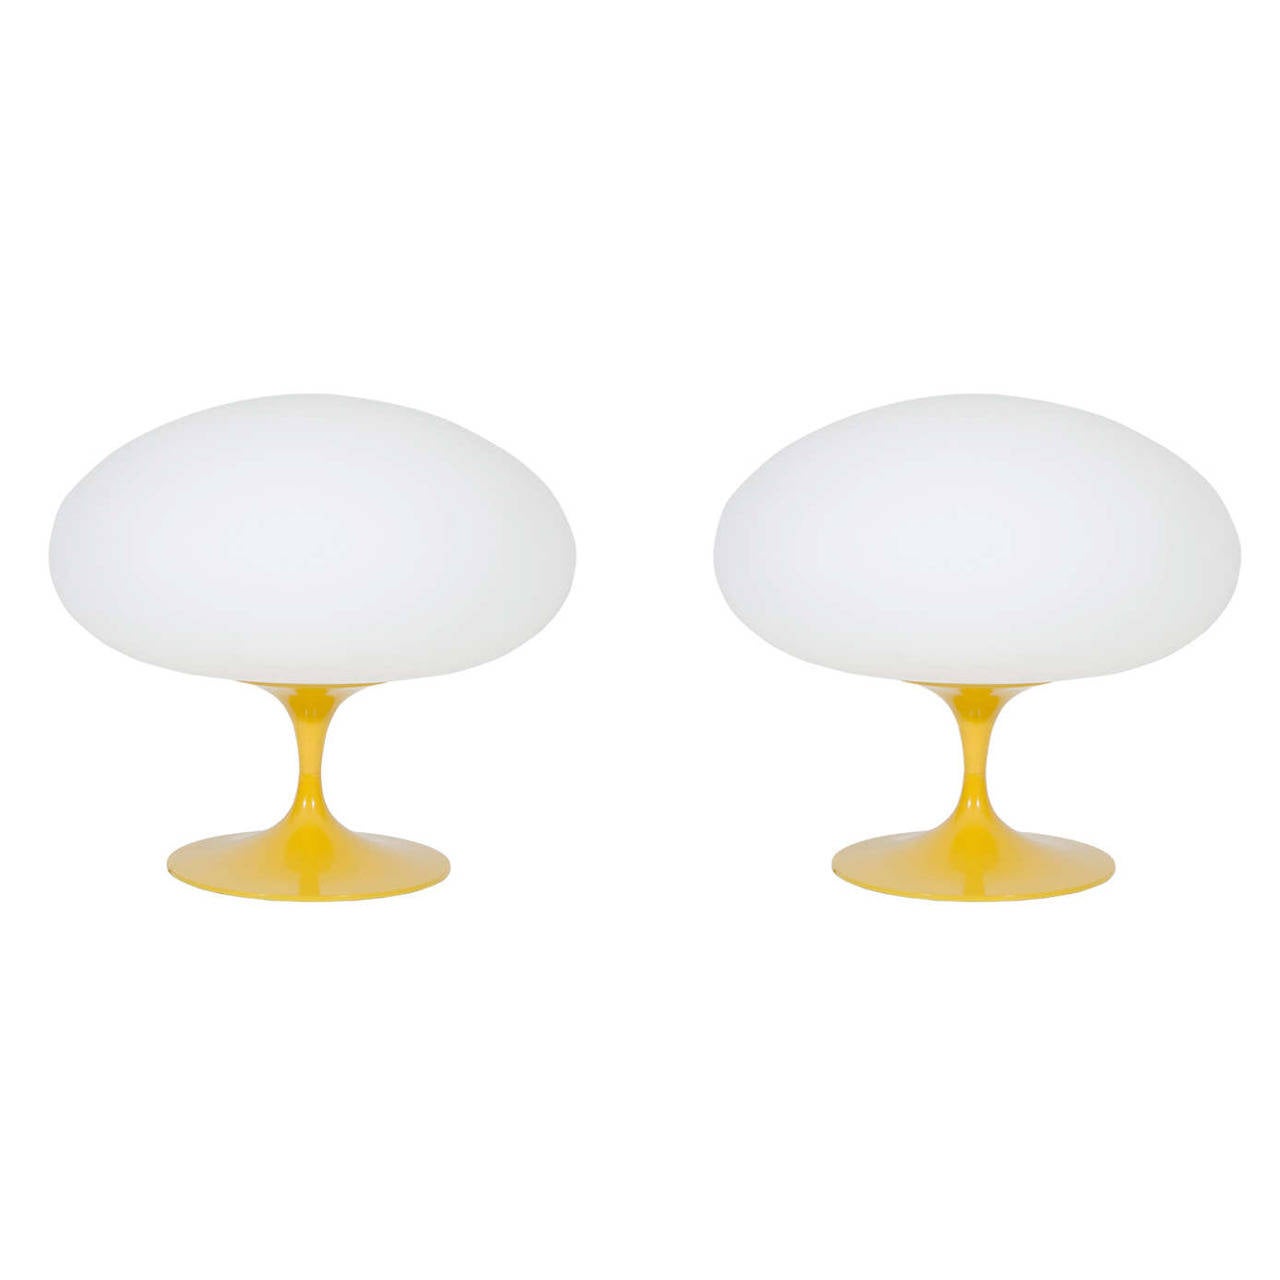 Pair of Table Lamps by Bill Curry for Laurel